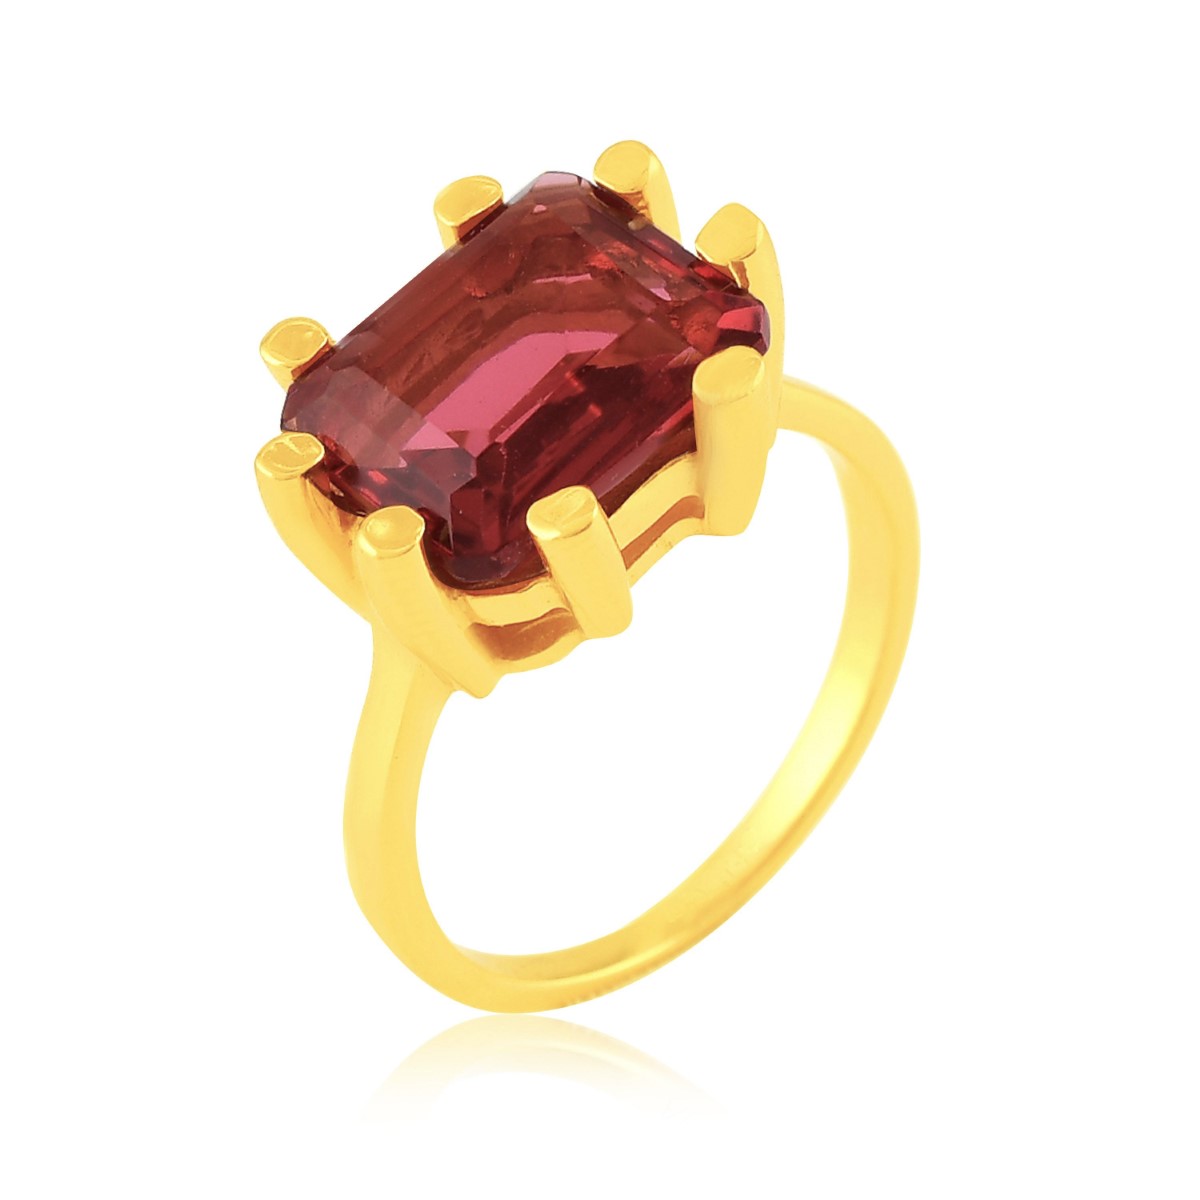 Shyla Square Claw Ruby Red Cocktail Ring